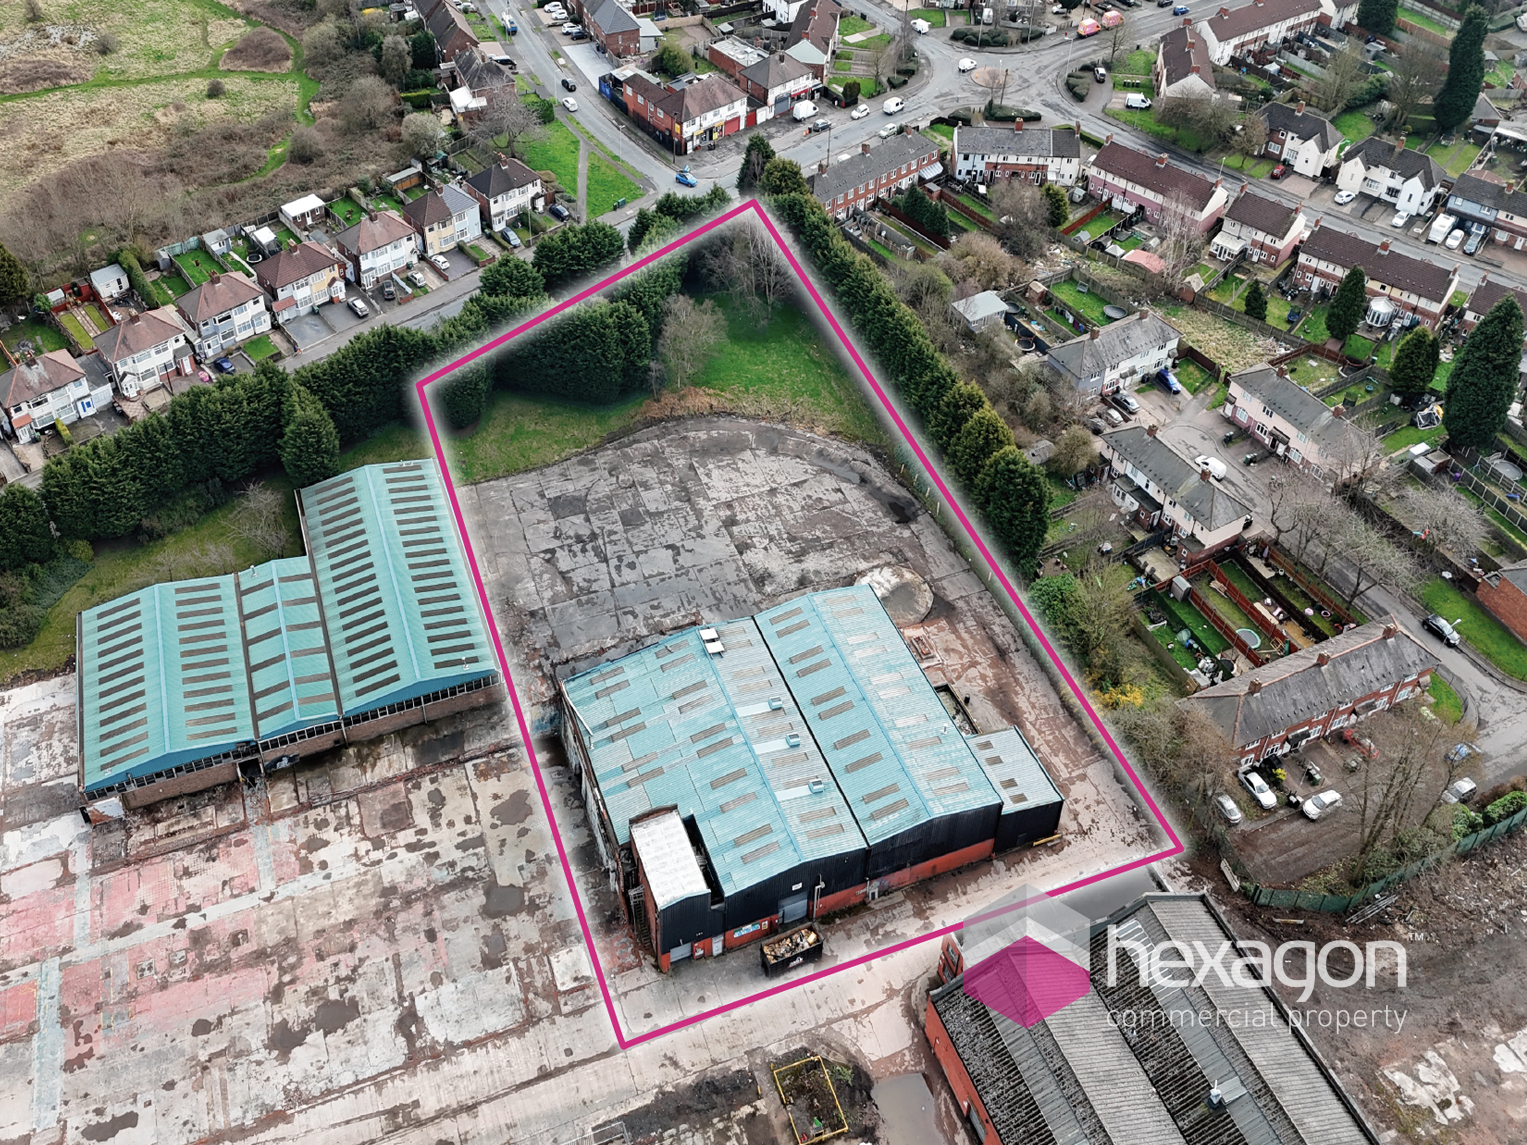 Land (Commercial) for rent in Wolverhampton. From Hexagon Commercial Property